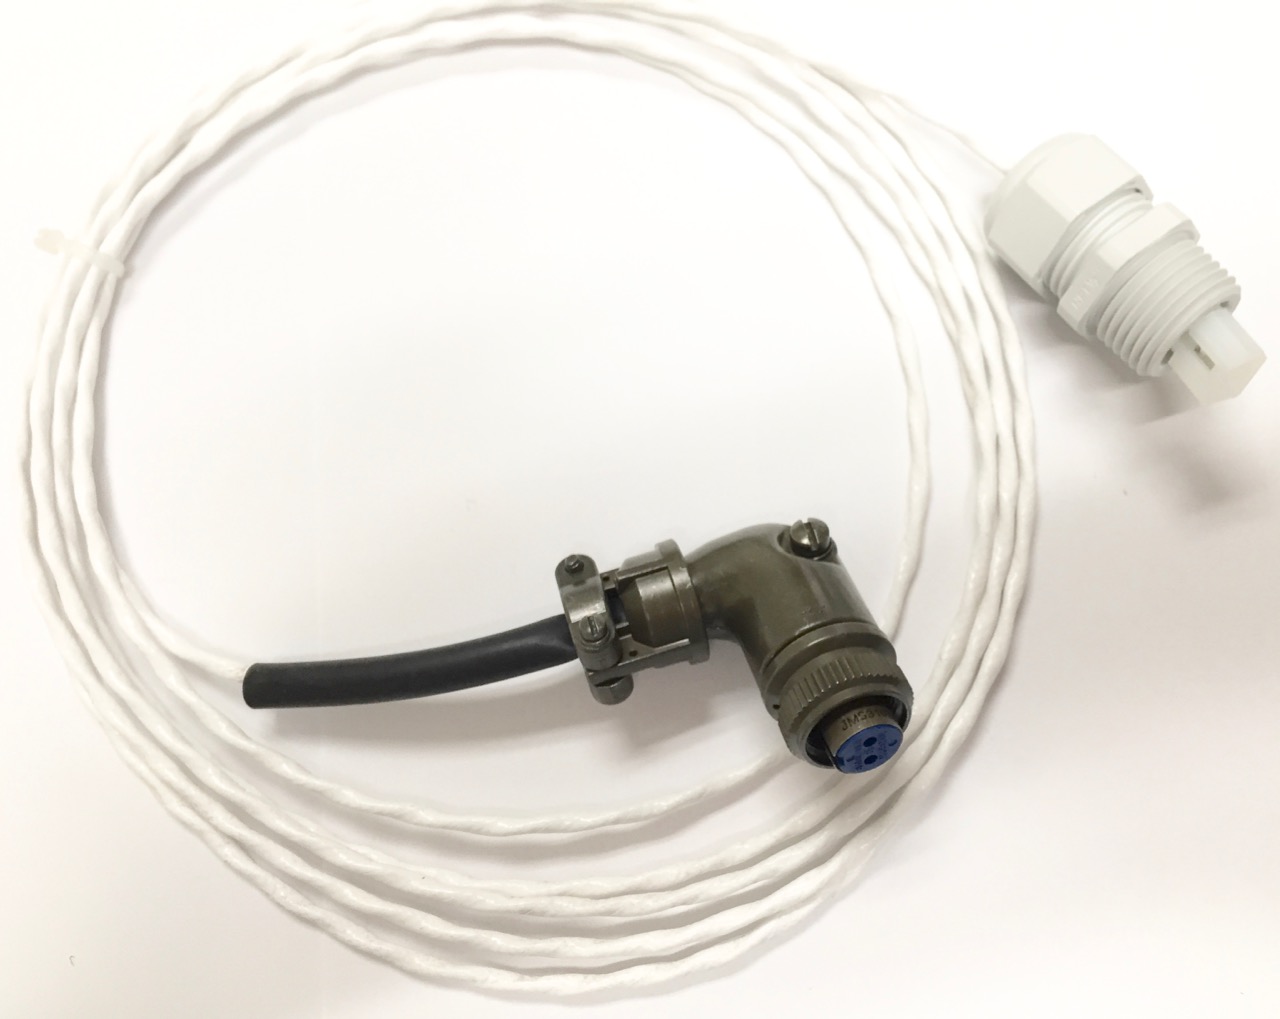 TI 10’ Hi-Temp Cable Assembly with 90° Amphenol Connector (10870-01/10)